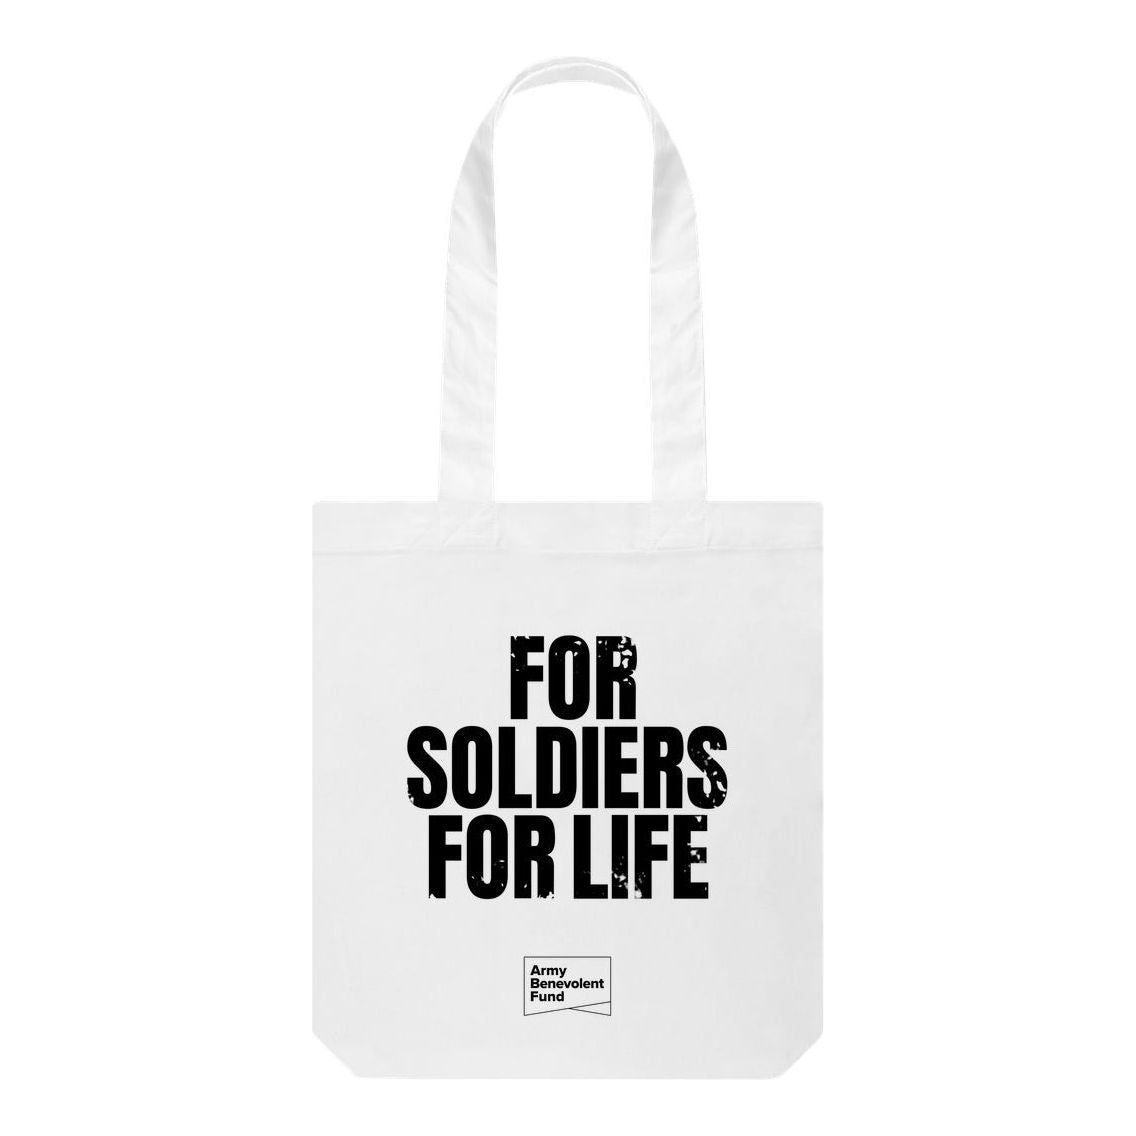 For Soldiers For Life Cotton Bag - Army Benevolent Fund